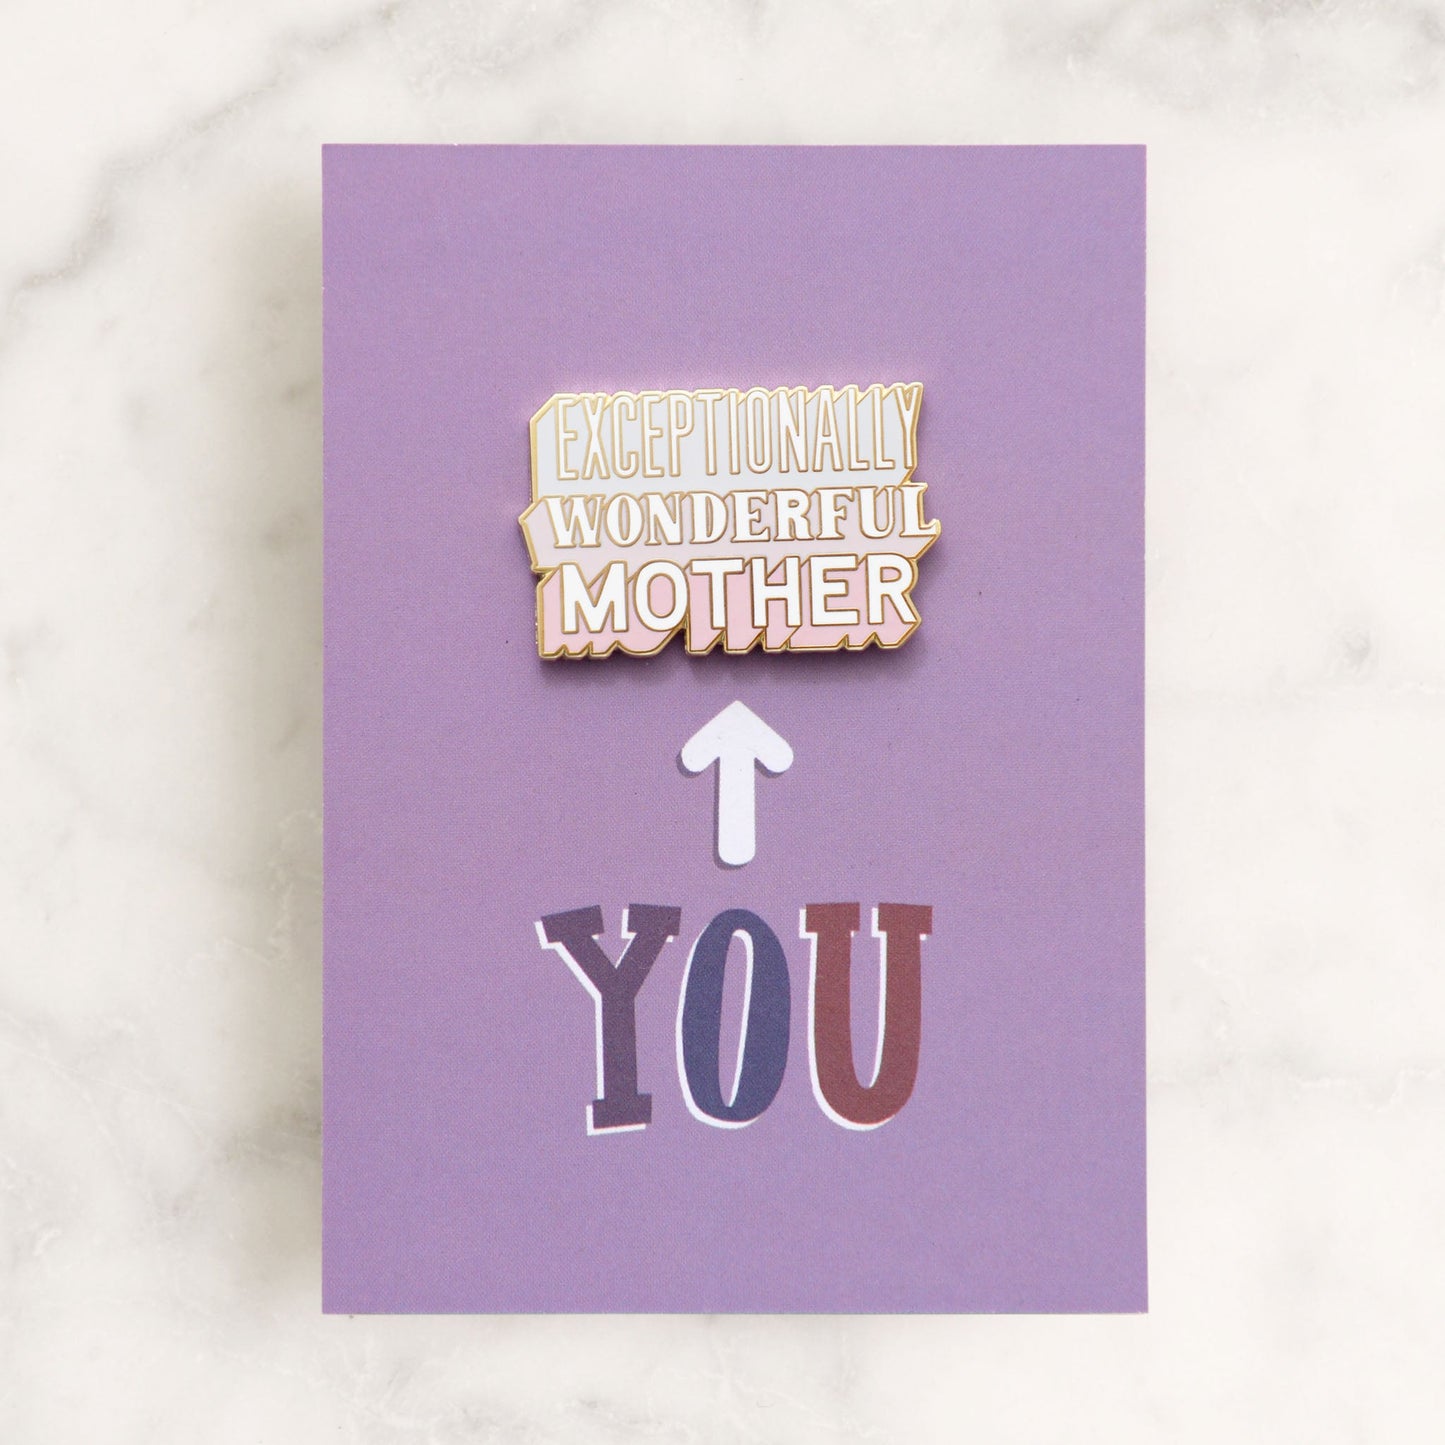 Enamel Pin Exceptionally Wonderful Mother